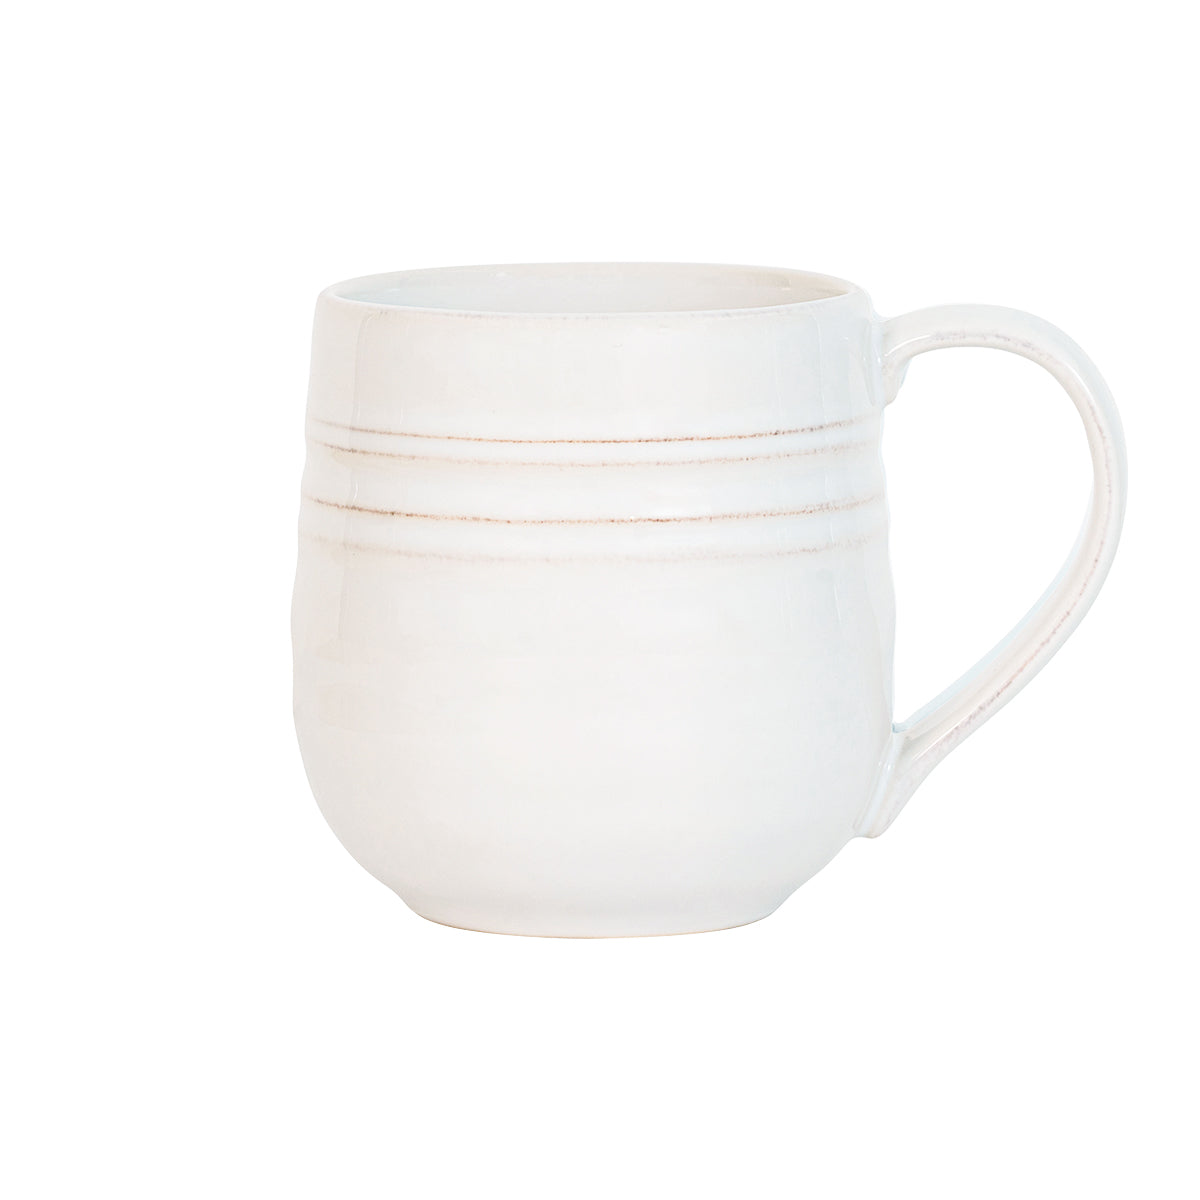 From our Bilbao Collection - Brimming with casual elegance, this generously sized mug is the perfect sophisticated neutral to pair with your every occasion for cozy sipping, from morning coffee to fireside hot chocolate.  